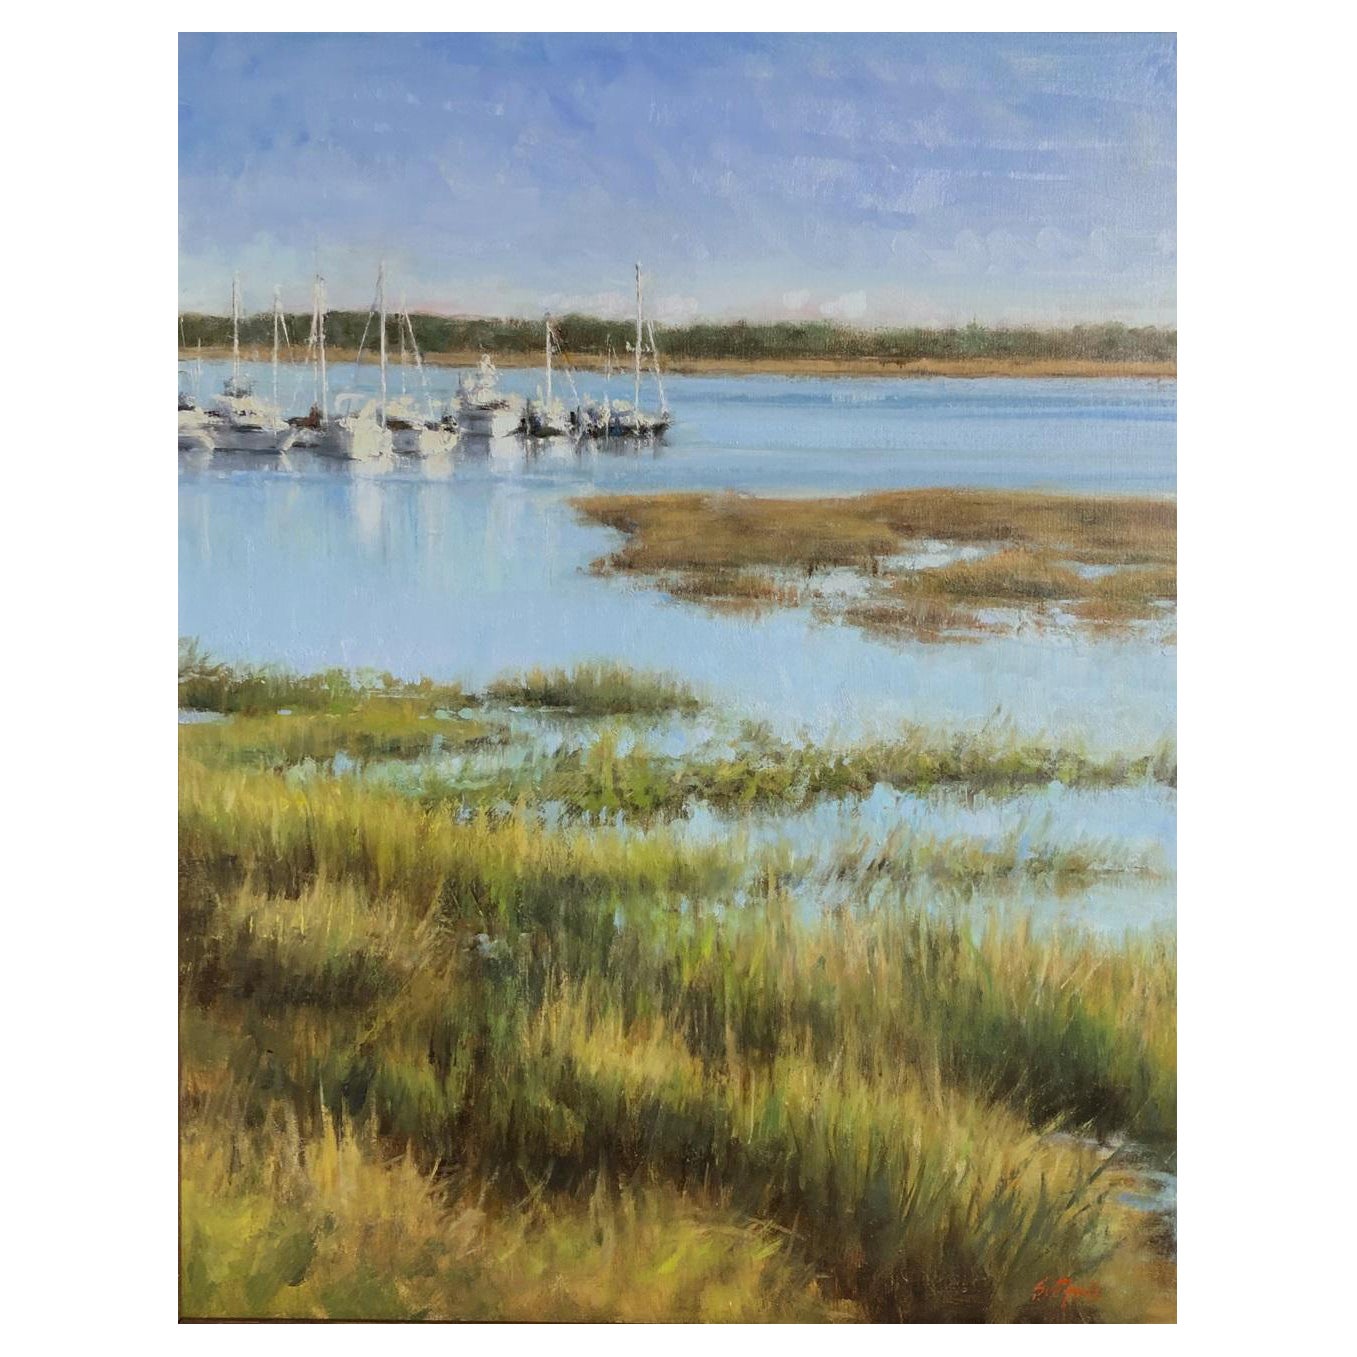 Framed Oil on Canvas Panel "Grassy Inlet" by Sue Foell